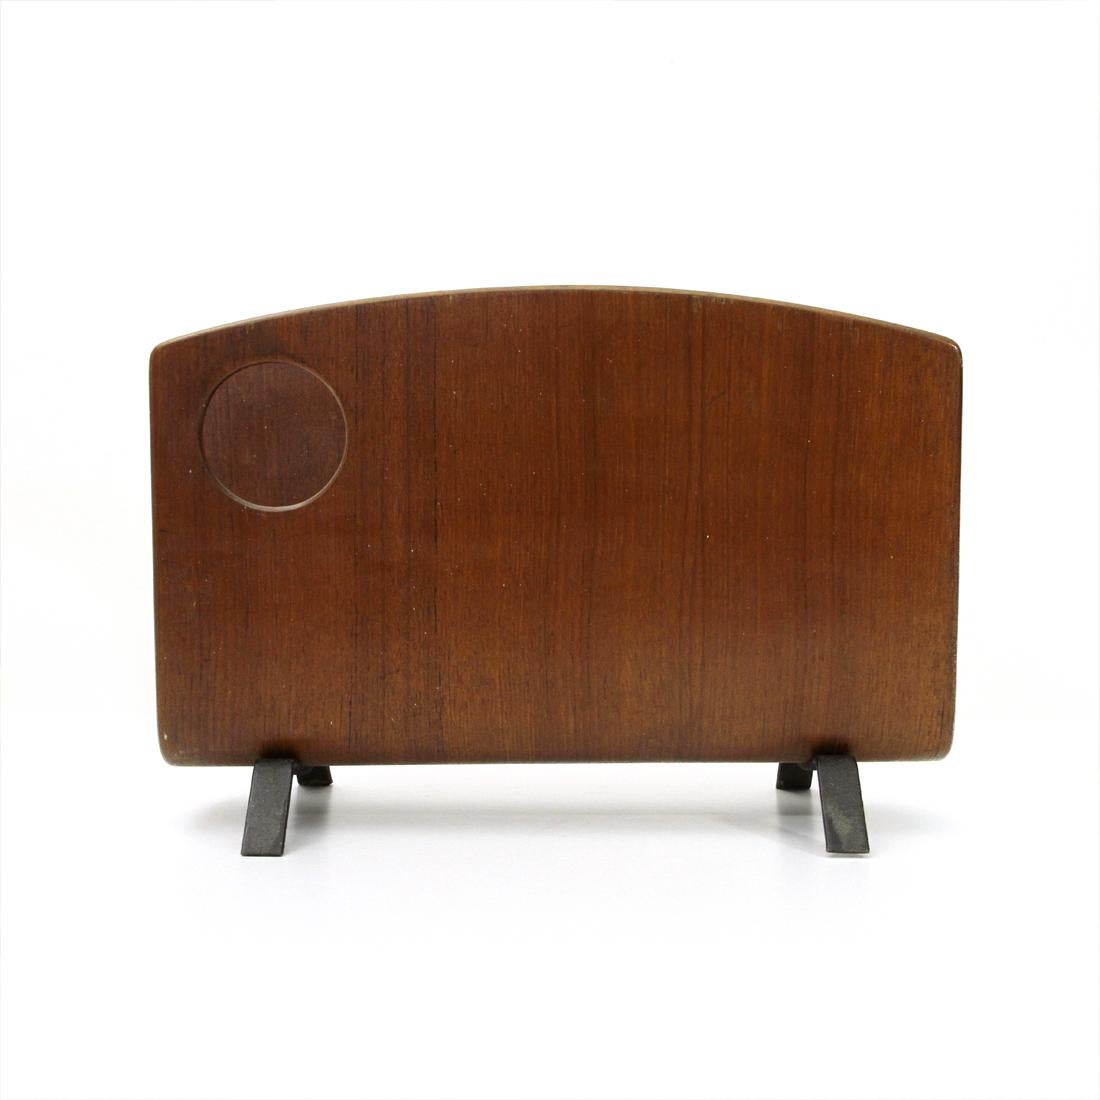 Teak magazine rack produced in the 1950s on a project by Campo & Graffi.
Curved teak plywood structure.
Legs in black painted metal.
Good general conditions, small break at the bottom.

Dimensions: Width 20 cm, depth 40 cm, height 27 cm.